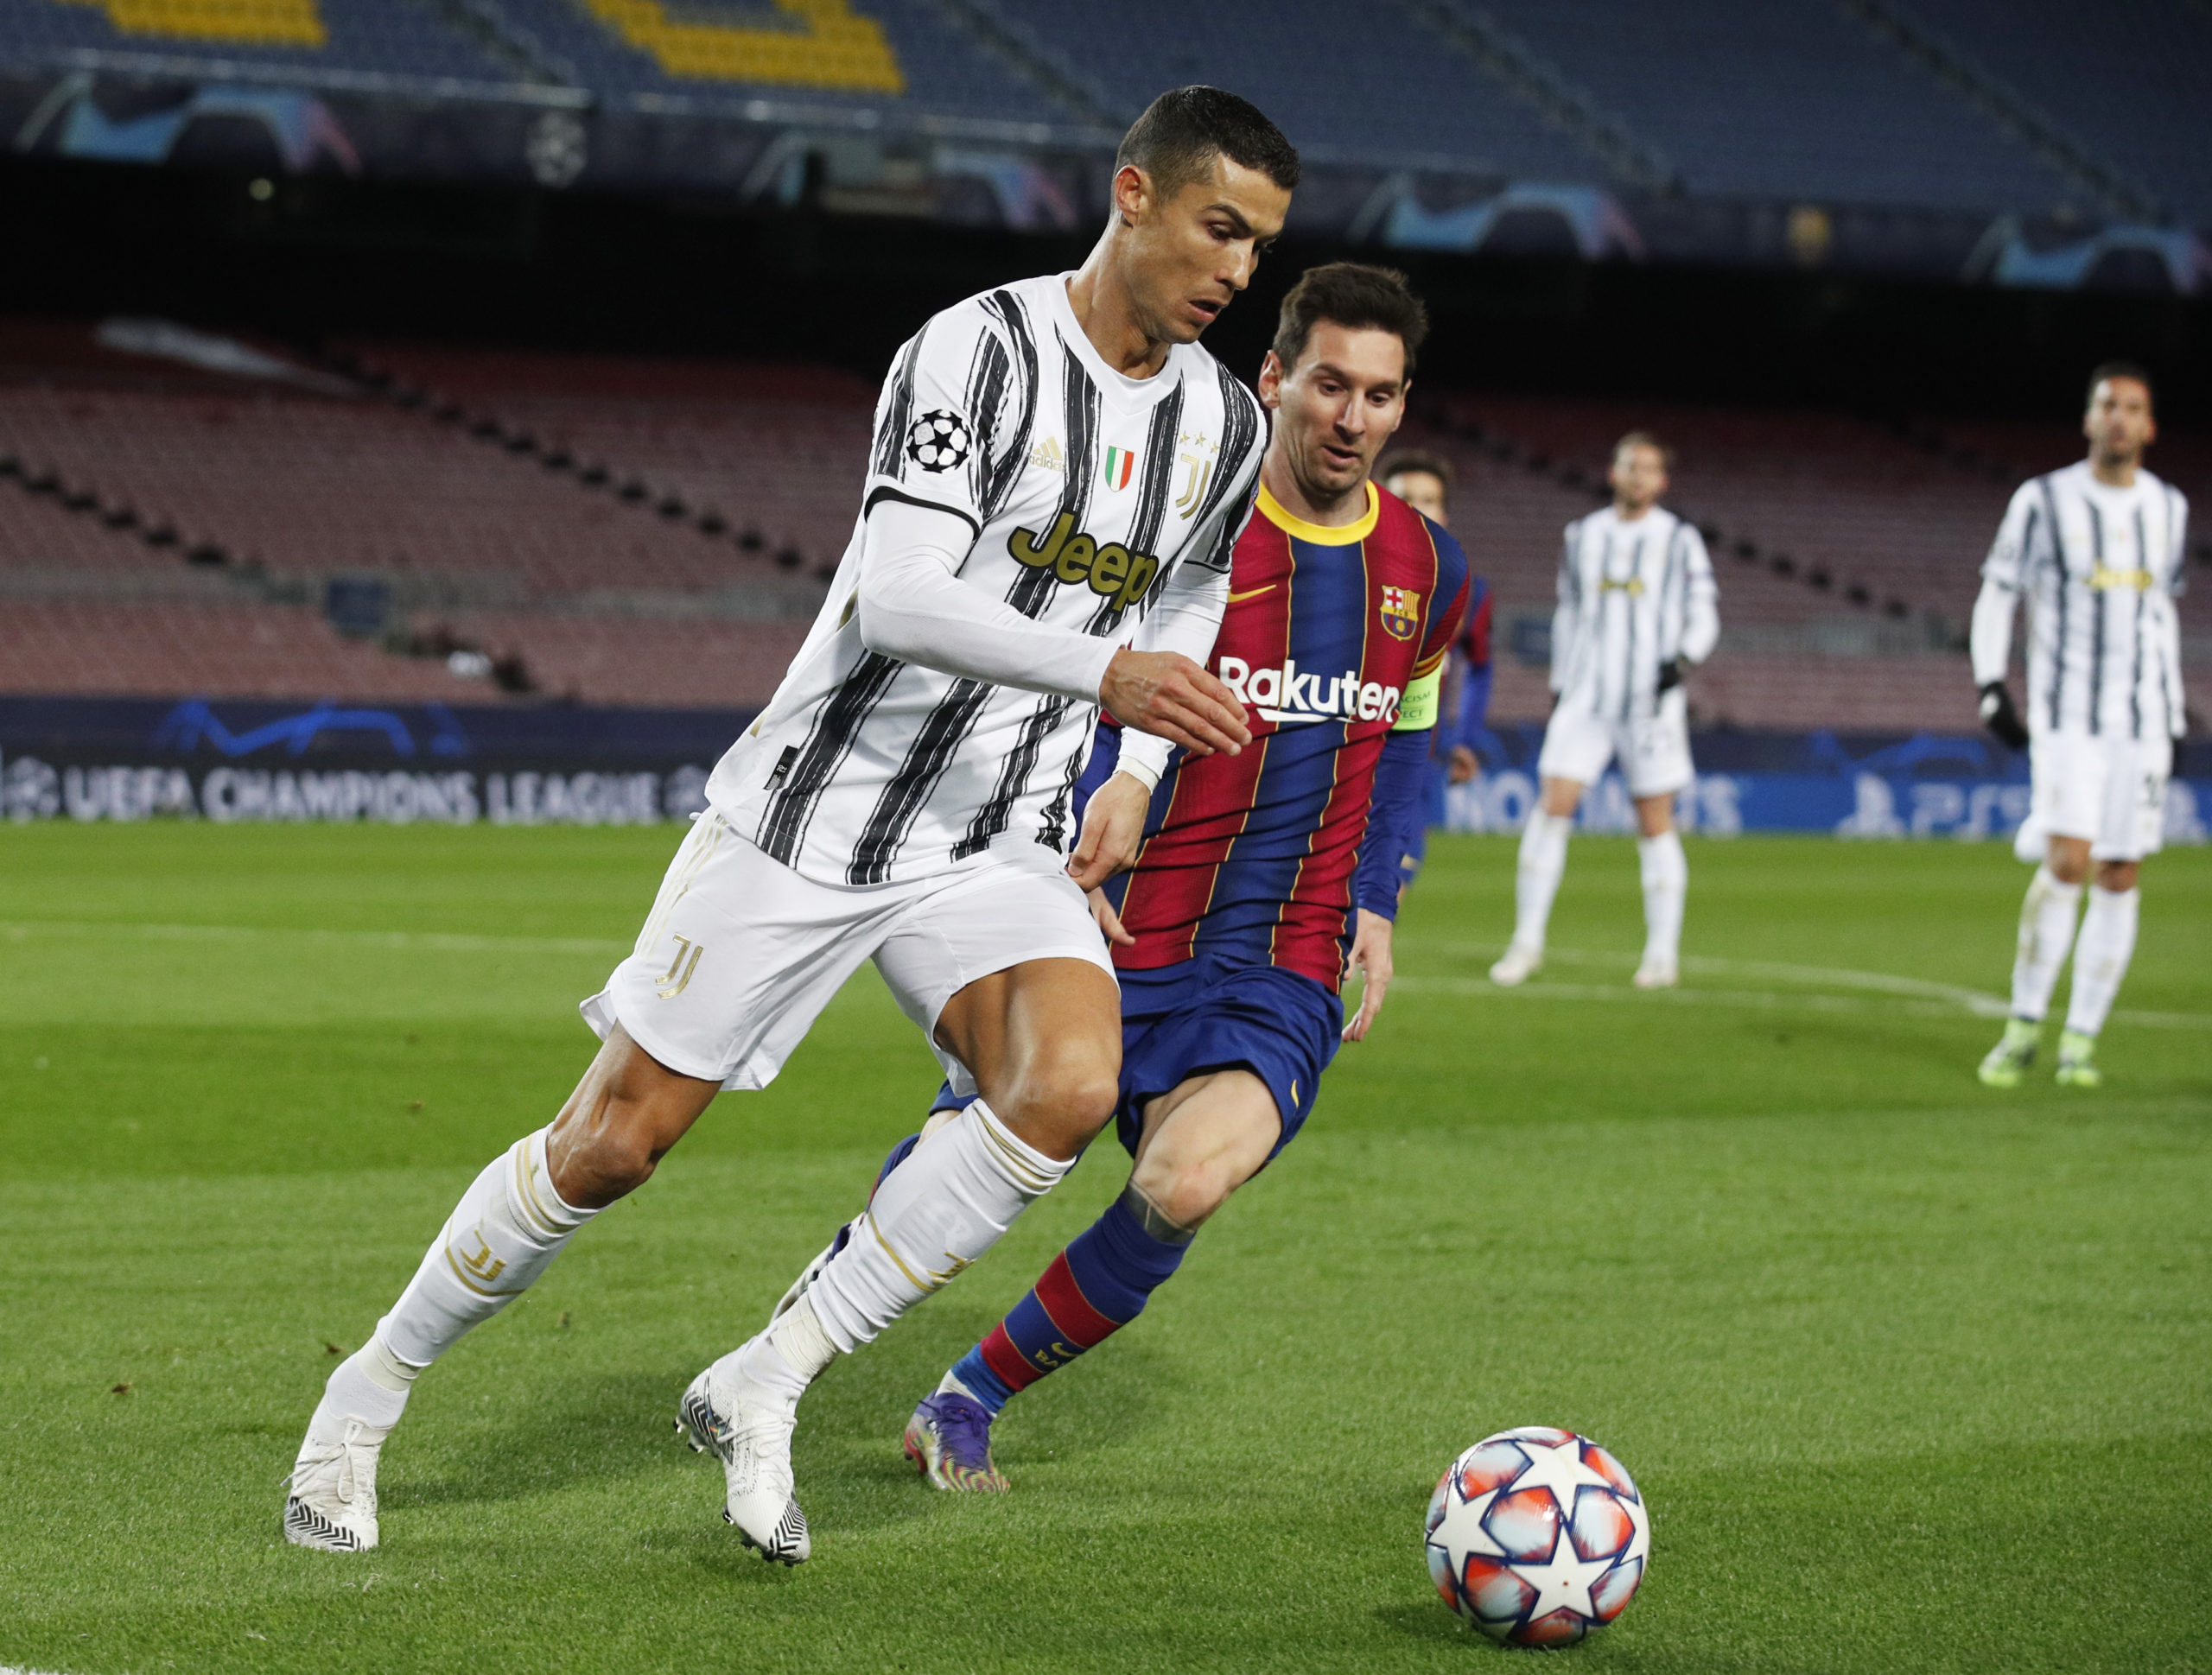 Ronaldo double helps Juventus to 3-0 win over Barcelona - Inquirer Sports